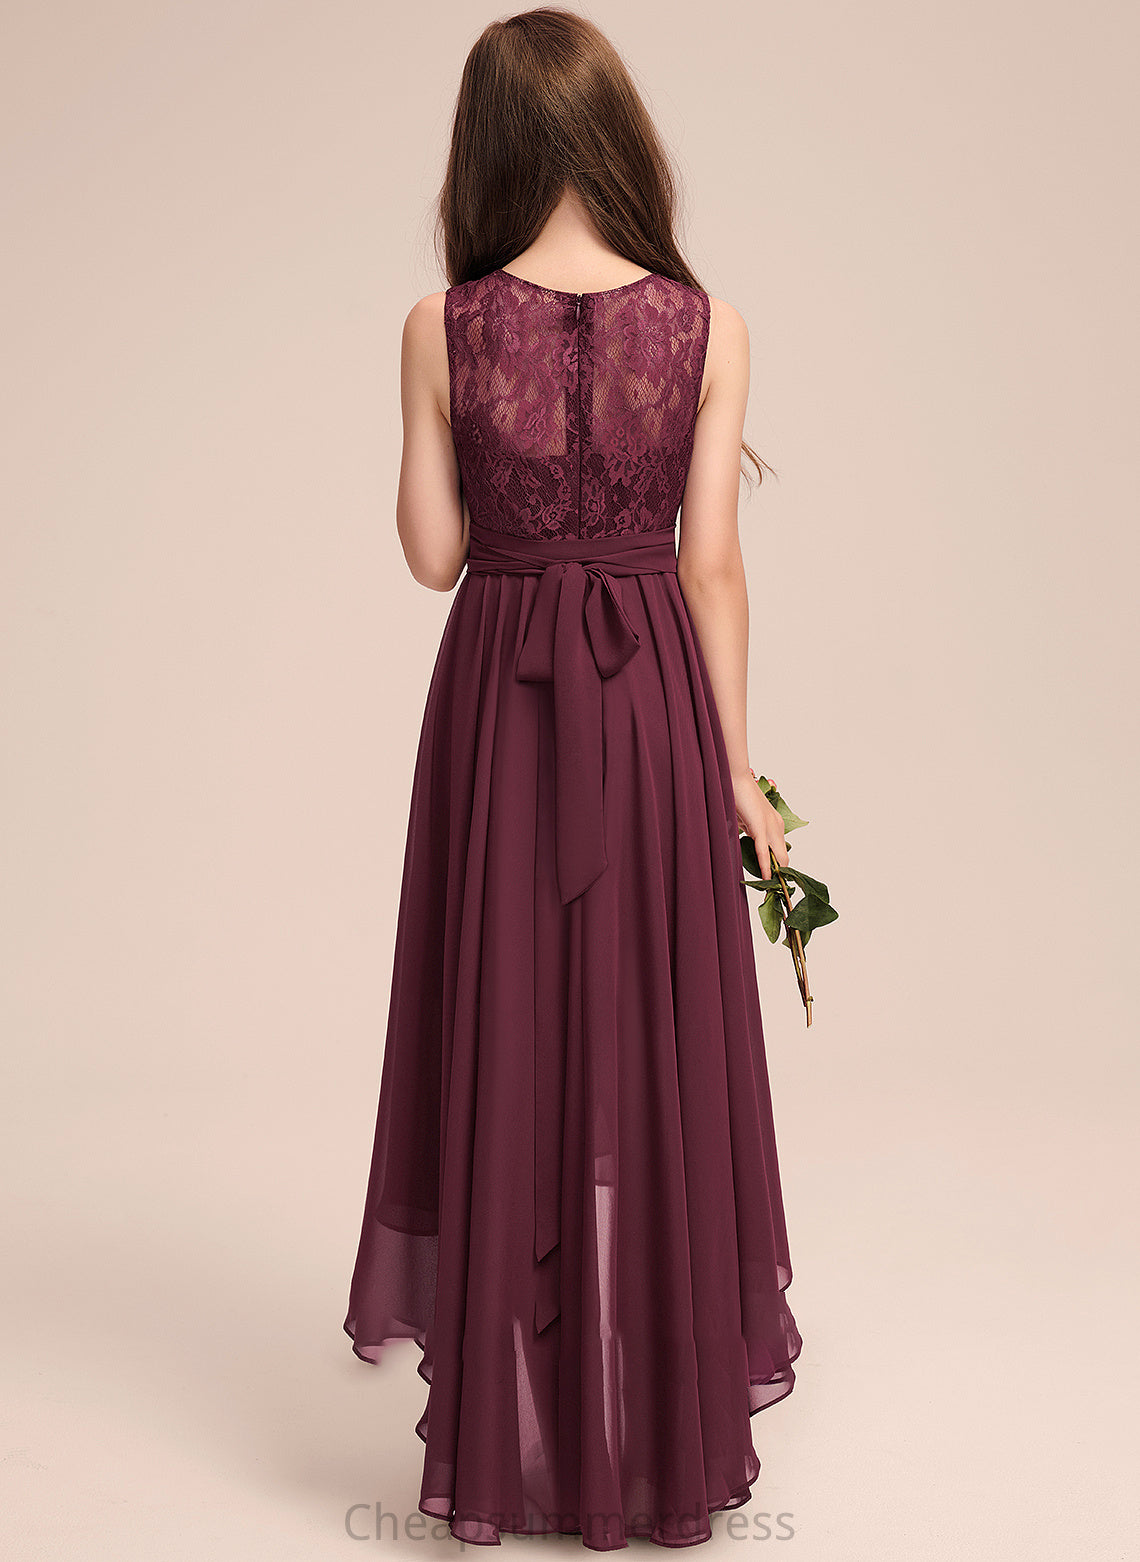 Chiffon With Bow(s) Jayden A-Line Neck Junior Bridesmaid Dresses Lace Asymmetrical Scoop